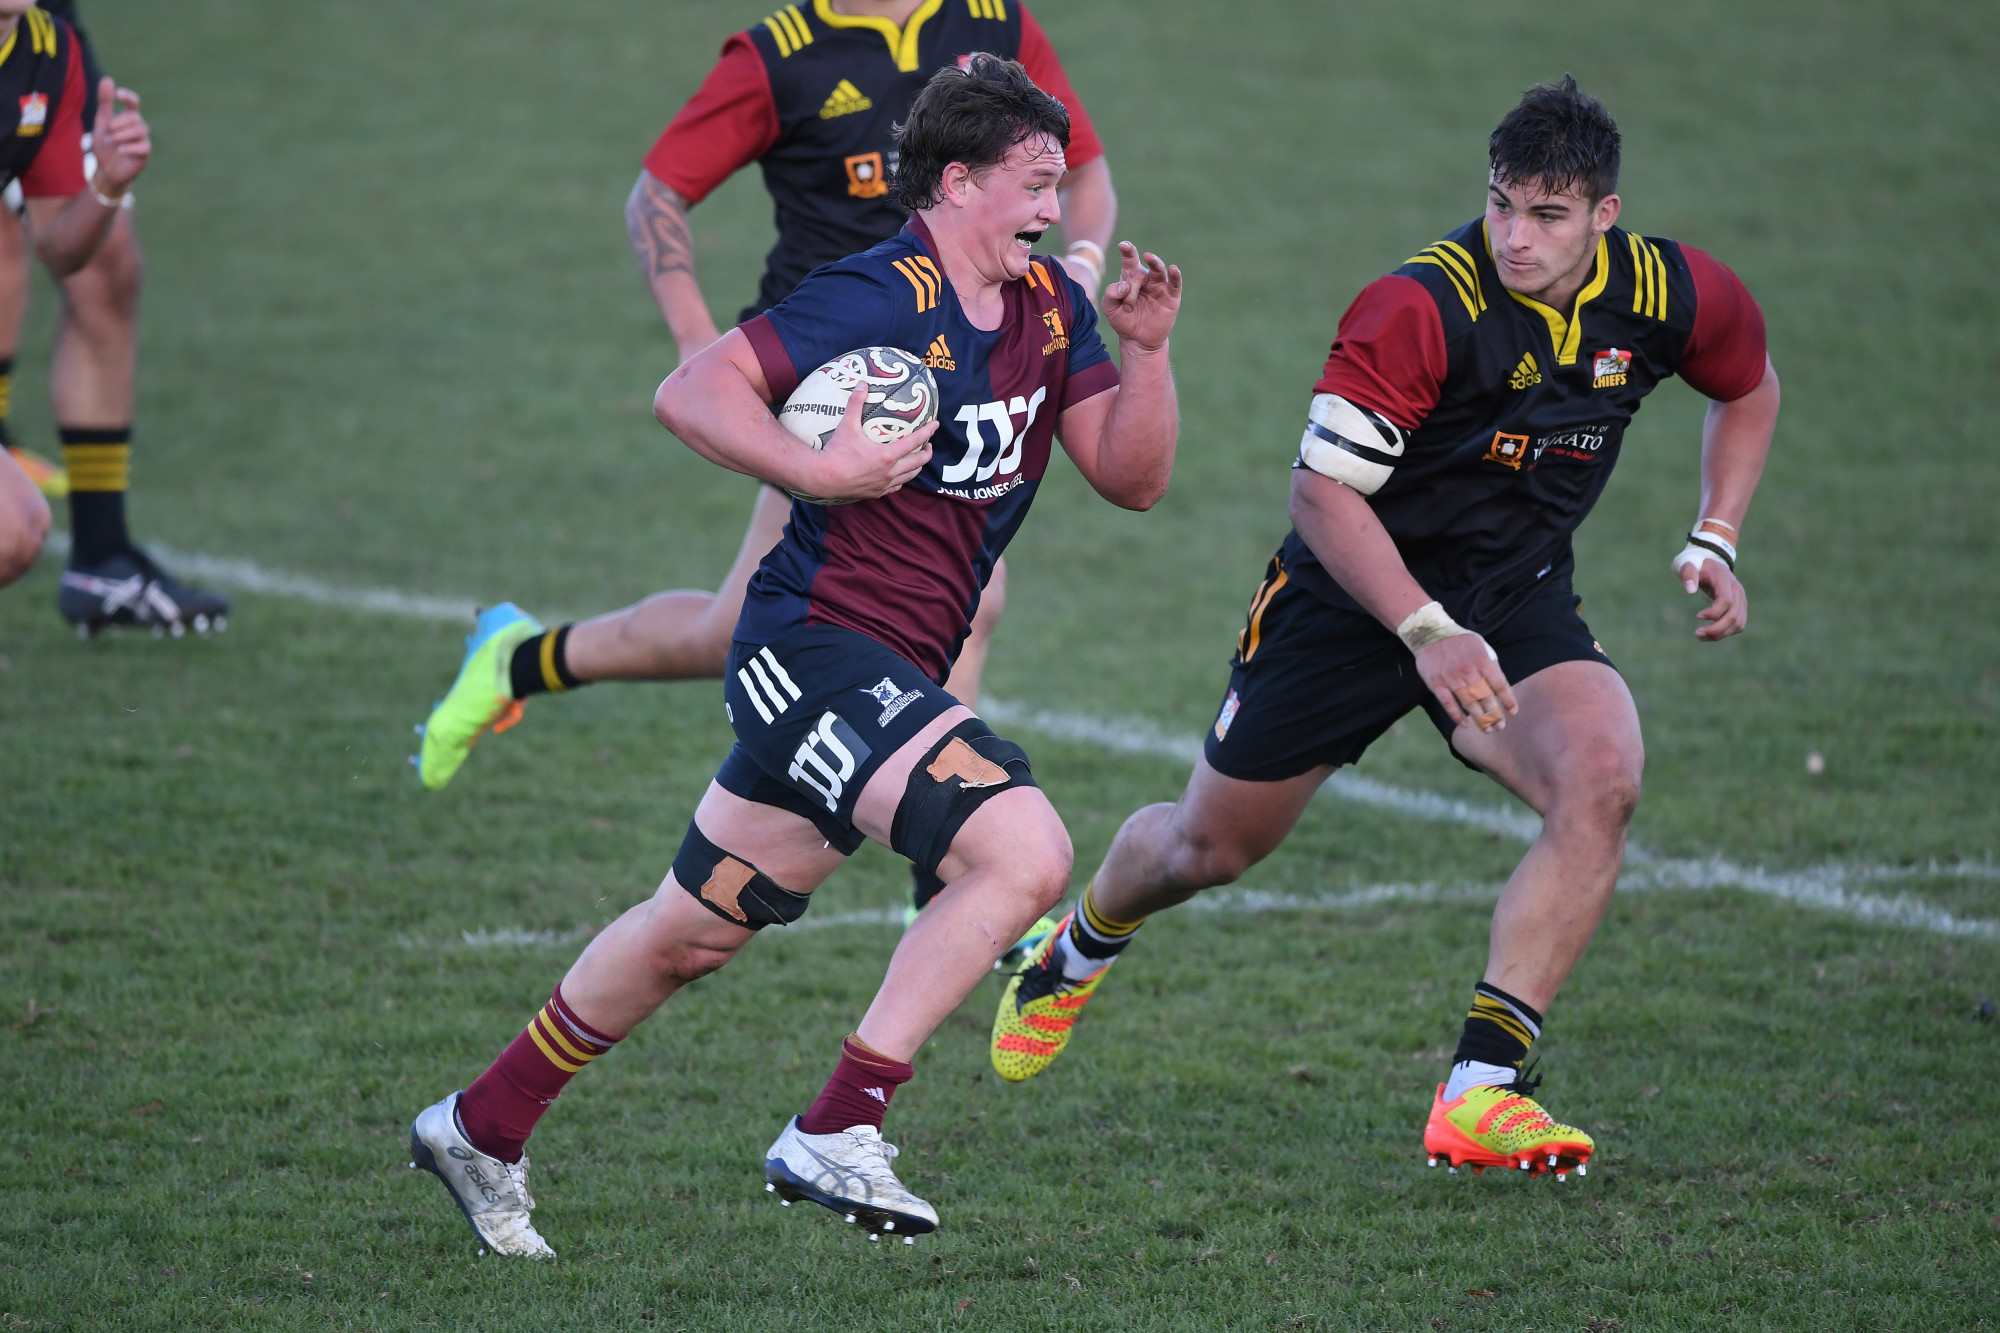 Next Generation of Local Highlanders Confirmed | Highlanders Rugby Club Limited Partnership